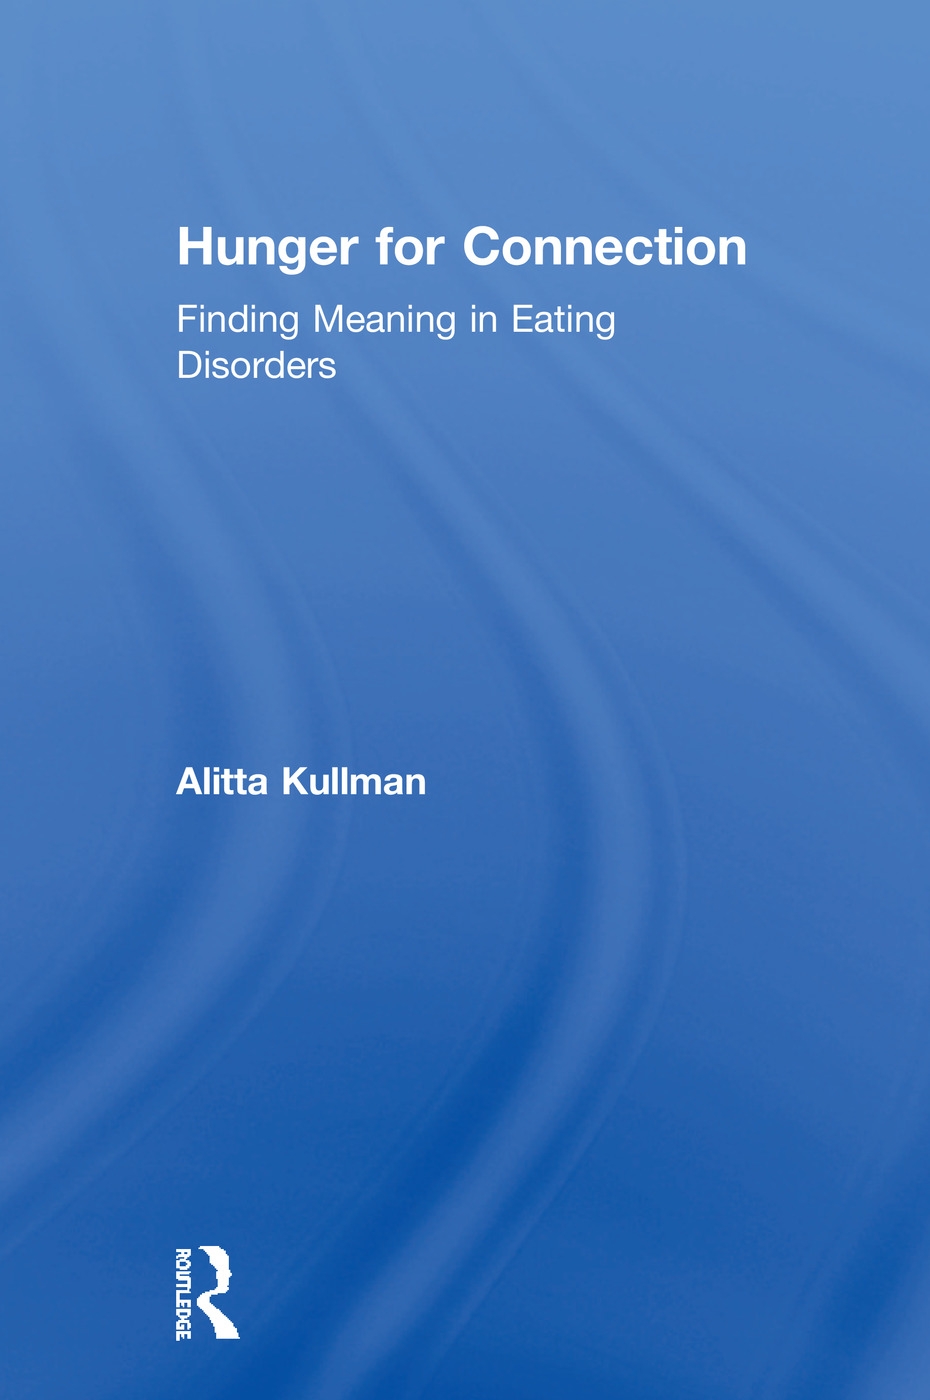 Hunger for Connection: Finding Meaning in Eating Disorders